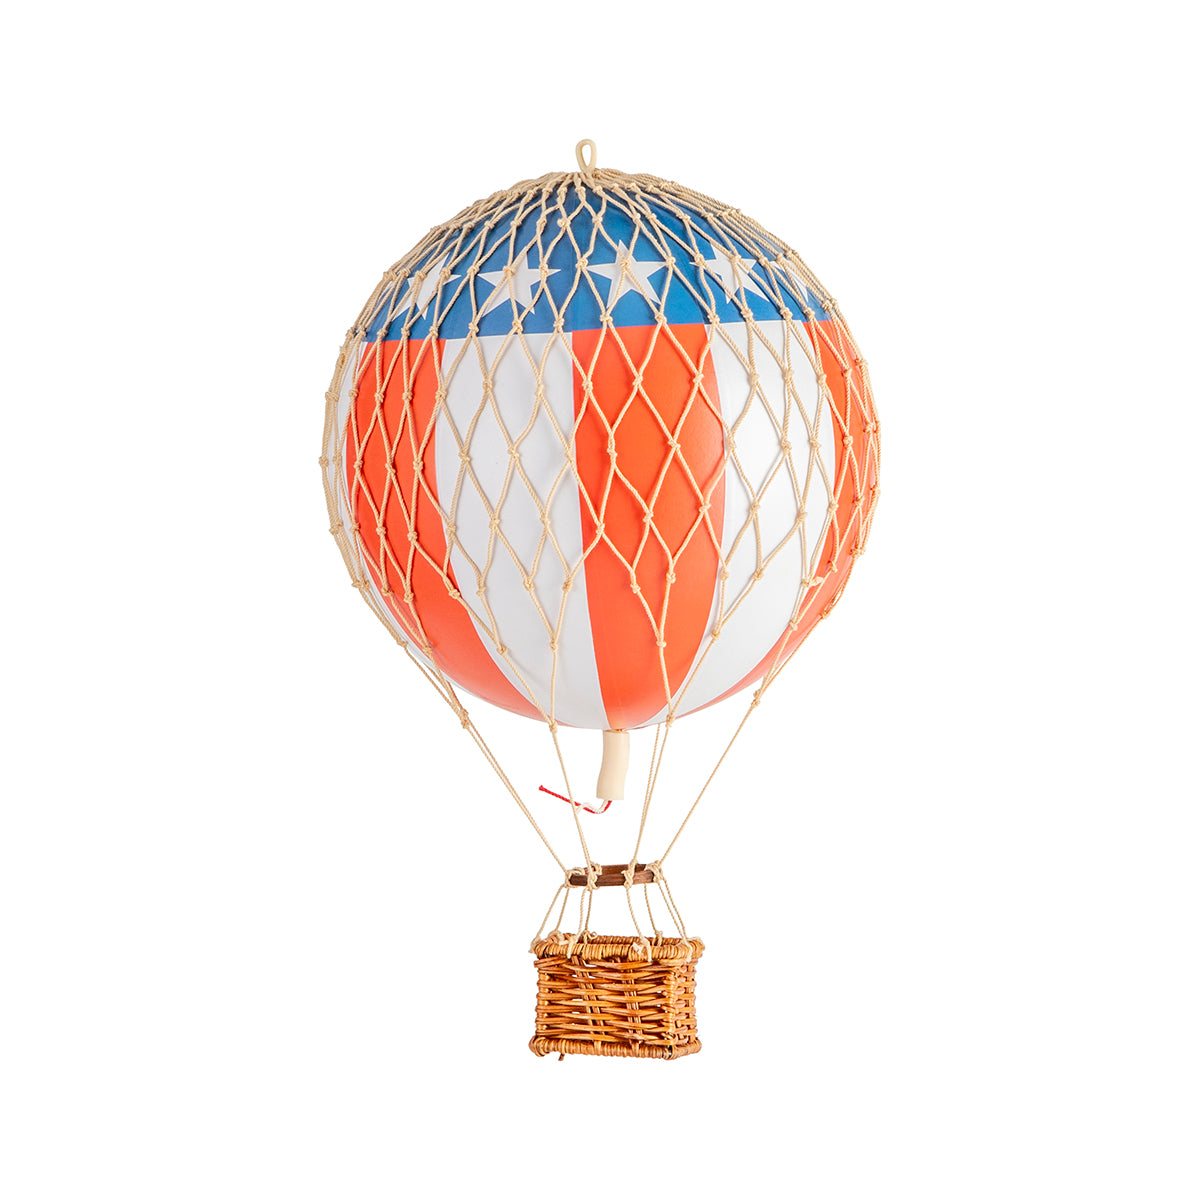 A quirky Wonderen Small Hot Air Balloon - Travels Light, proudly displaying an American flag.